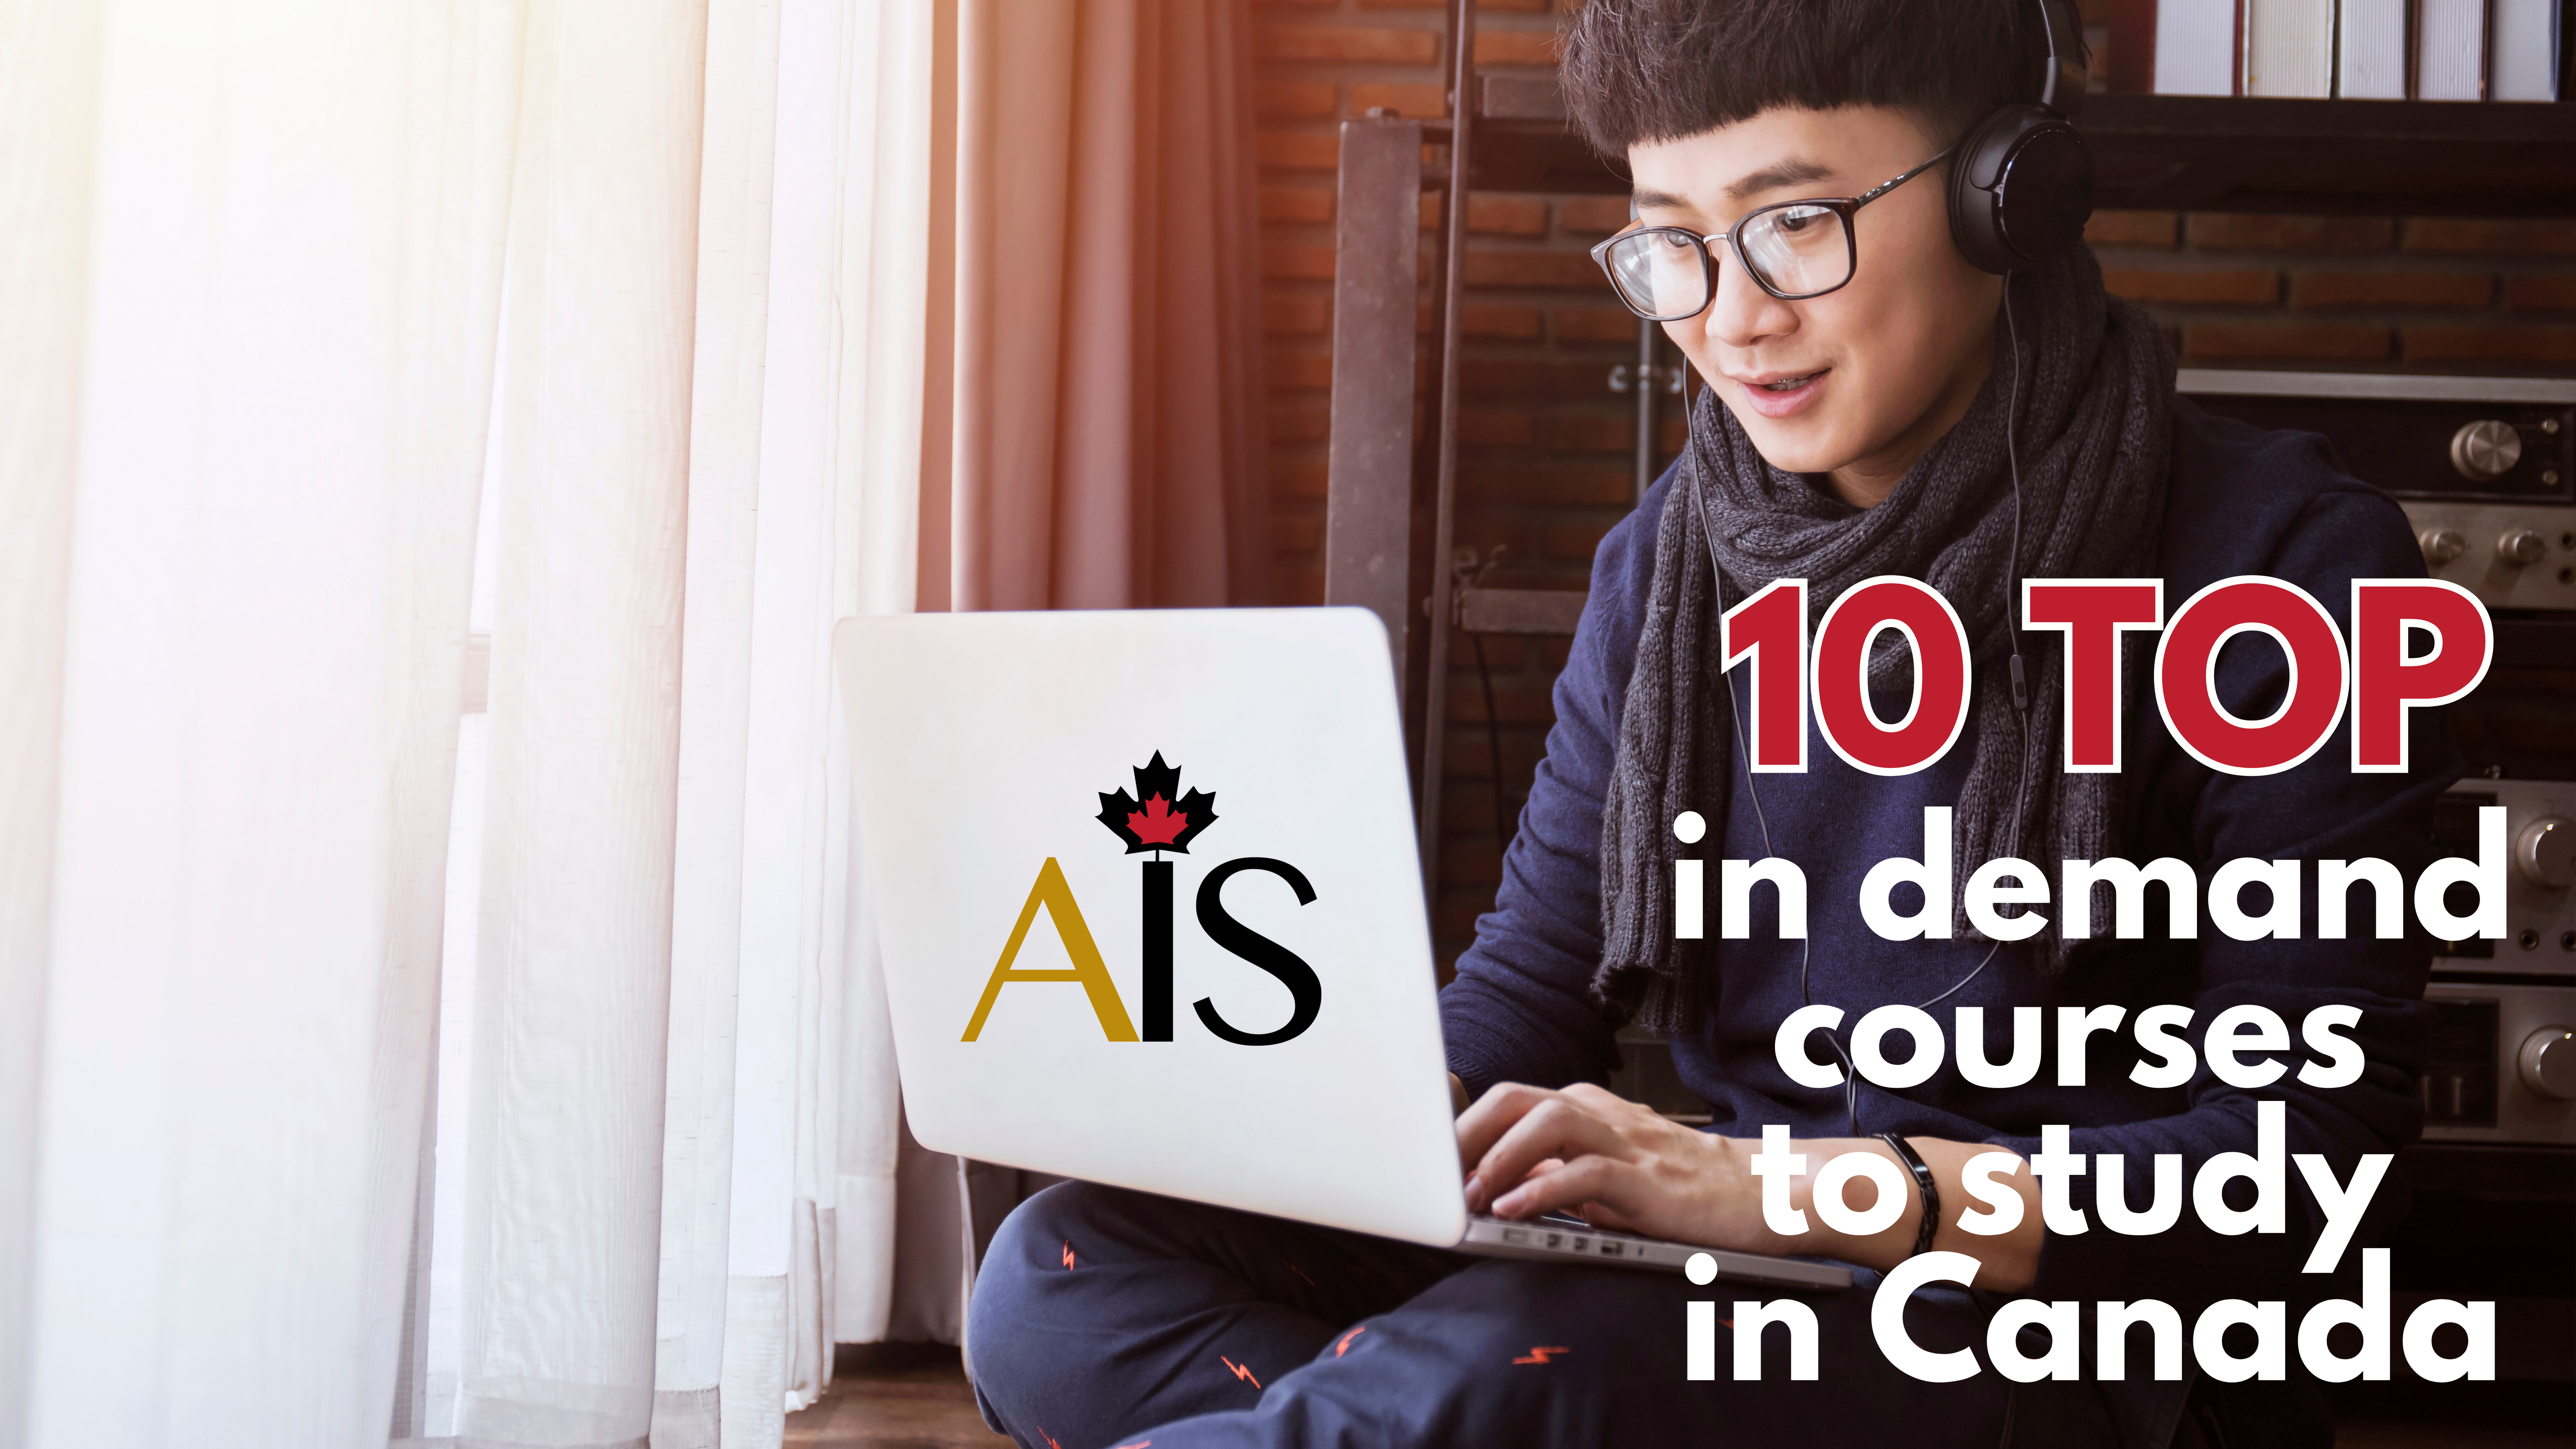 The Top 10 In-Demand Courses to Study in Canada